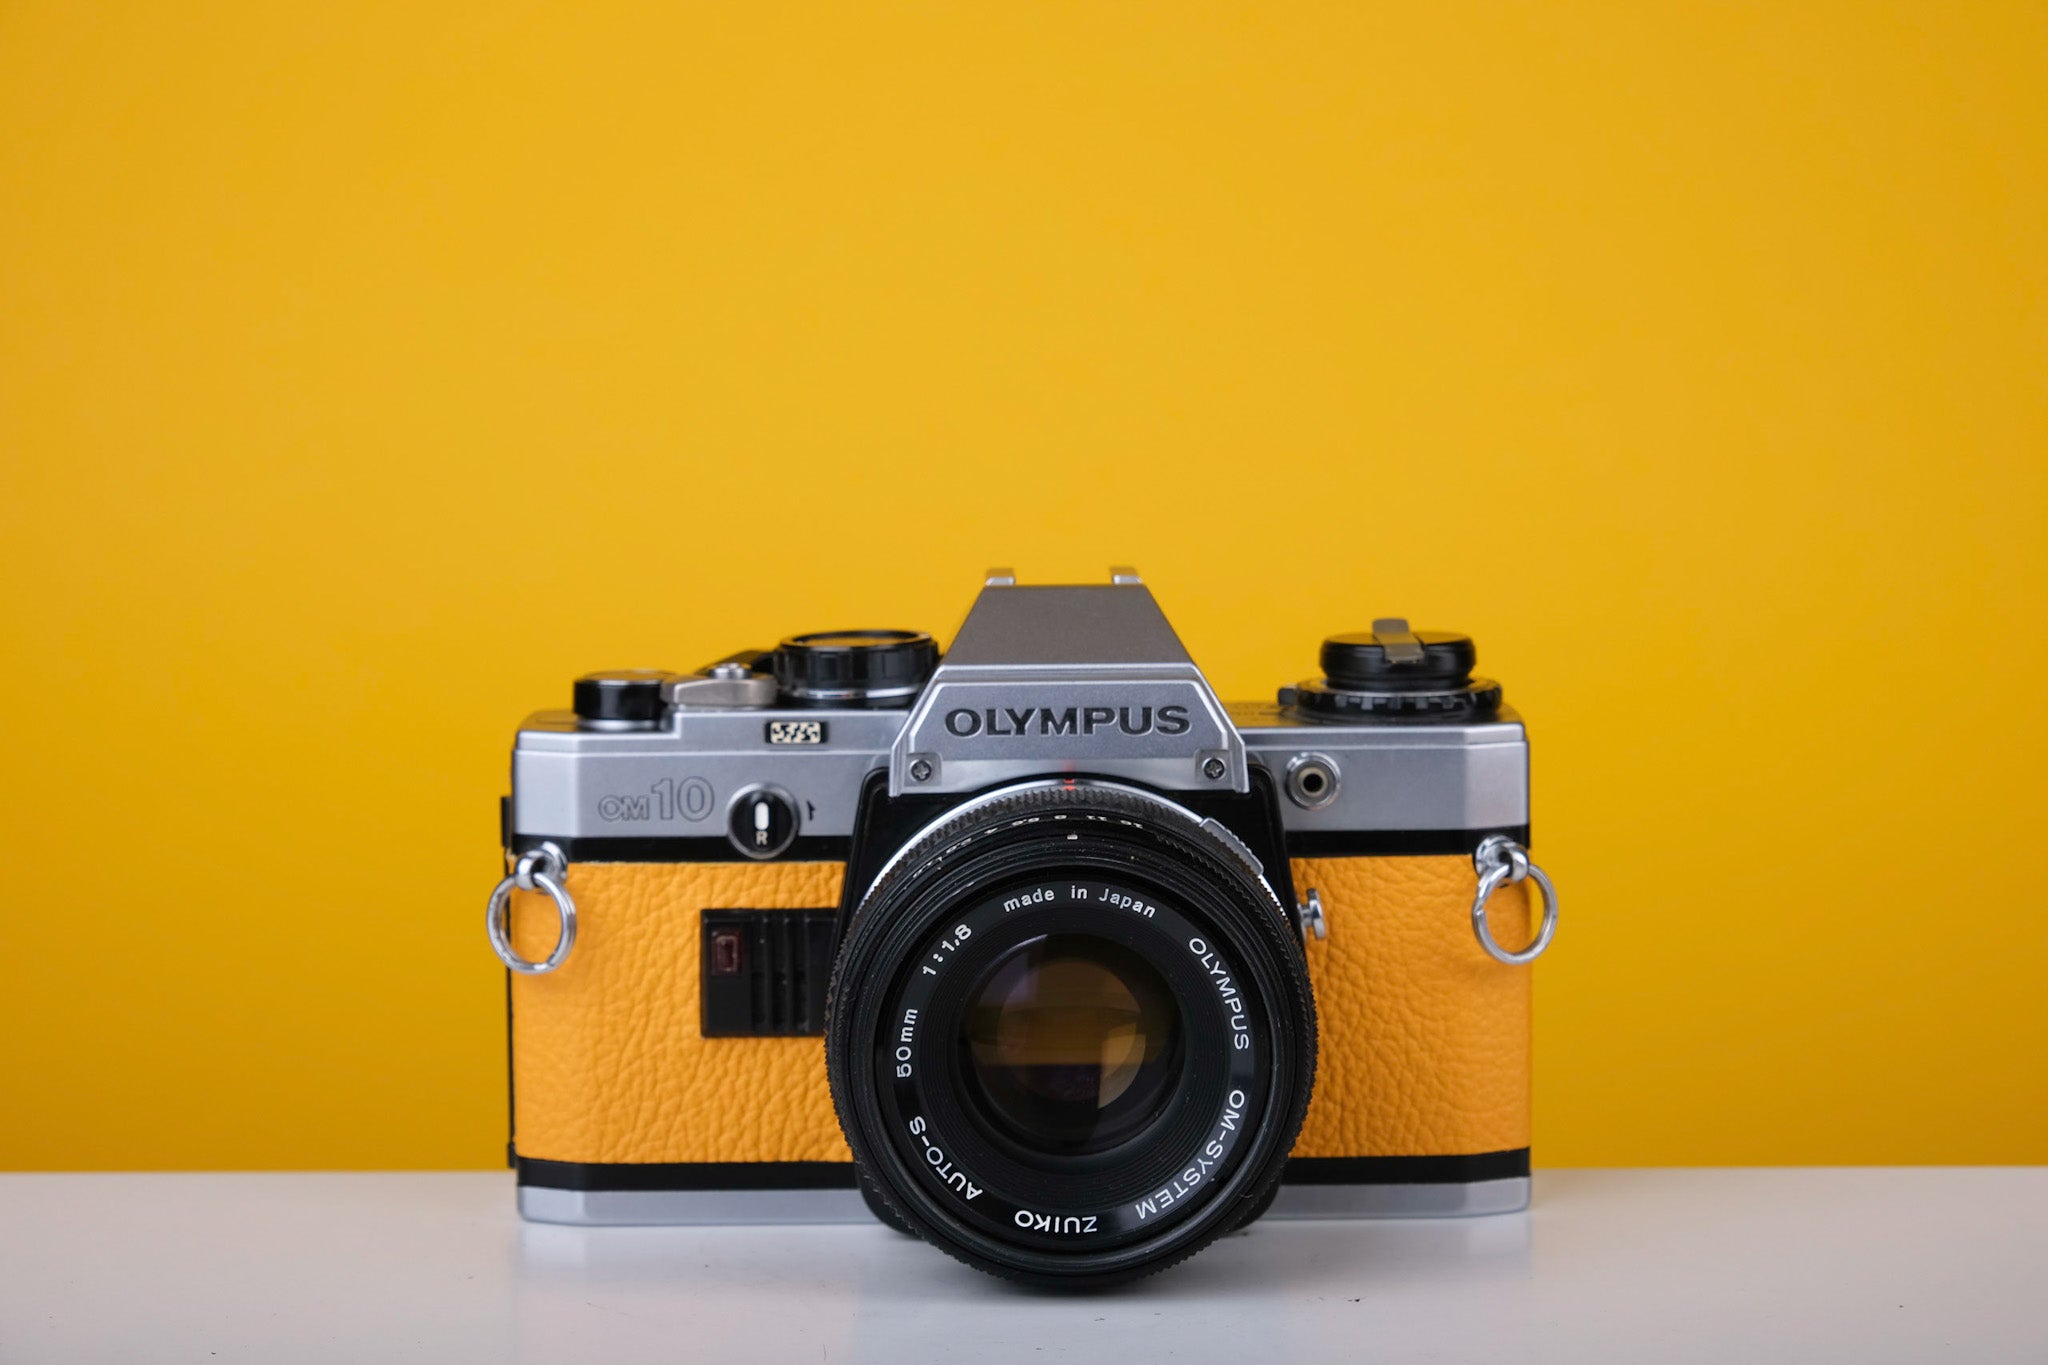 Olympus OM10 Vintage Film Camera with 50mm f/1.8 Lens With New